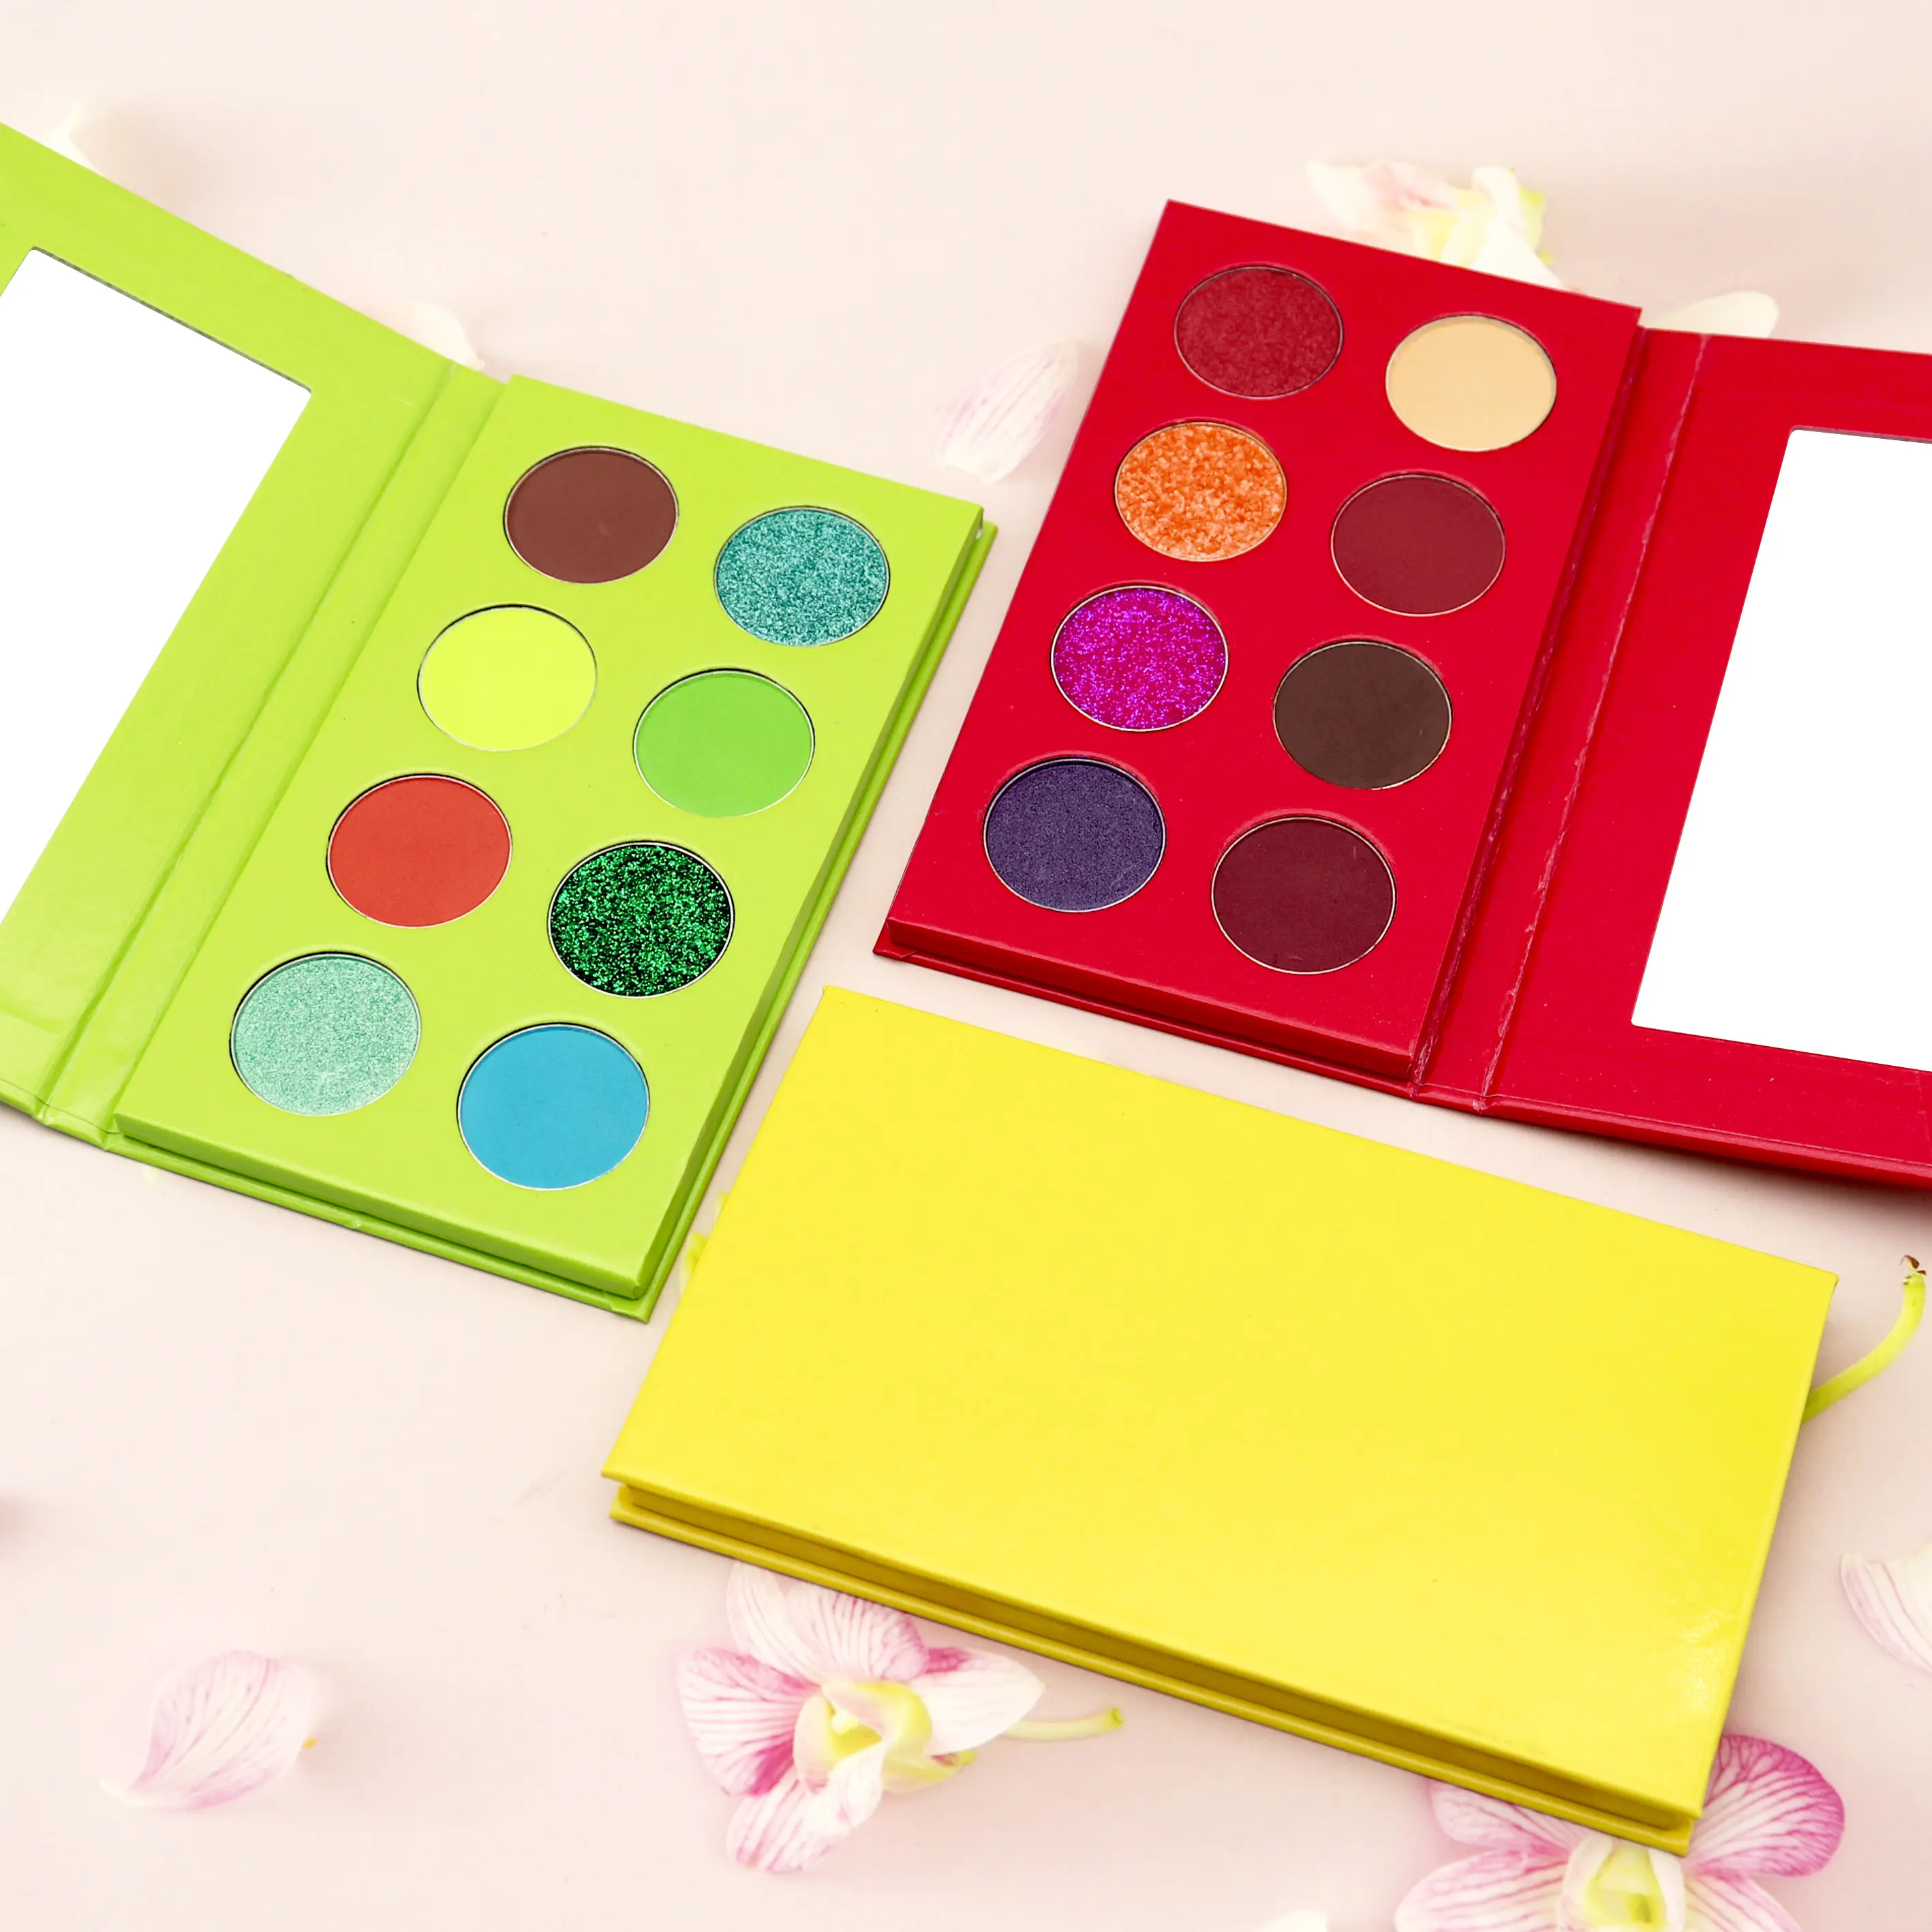 New Trending Private Label Makeup Hot Colors Red Green Pink 6 Colors DIY Eyeshadow Palette